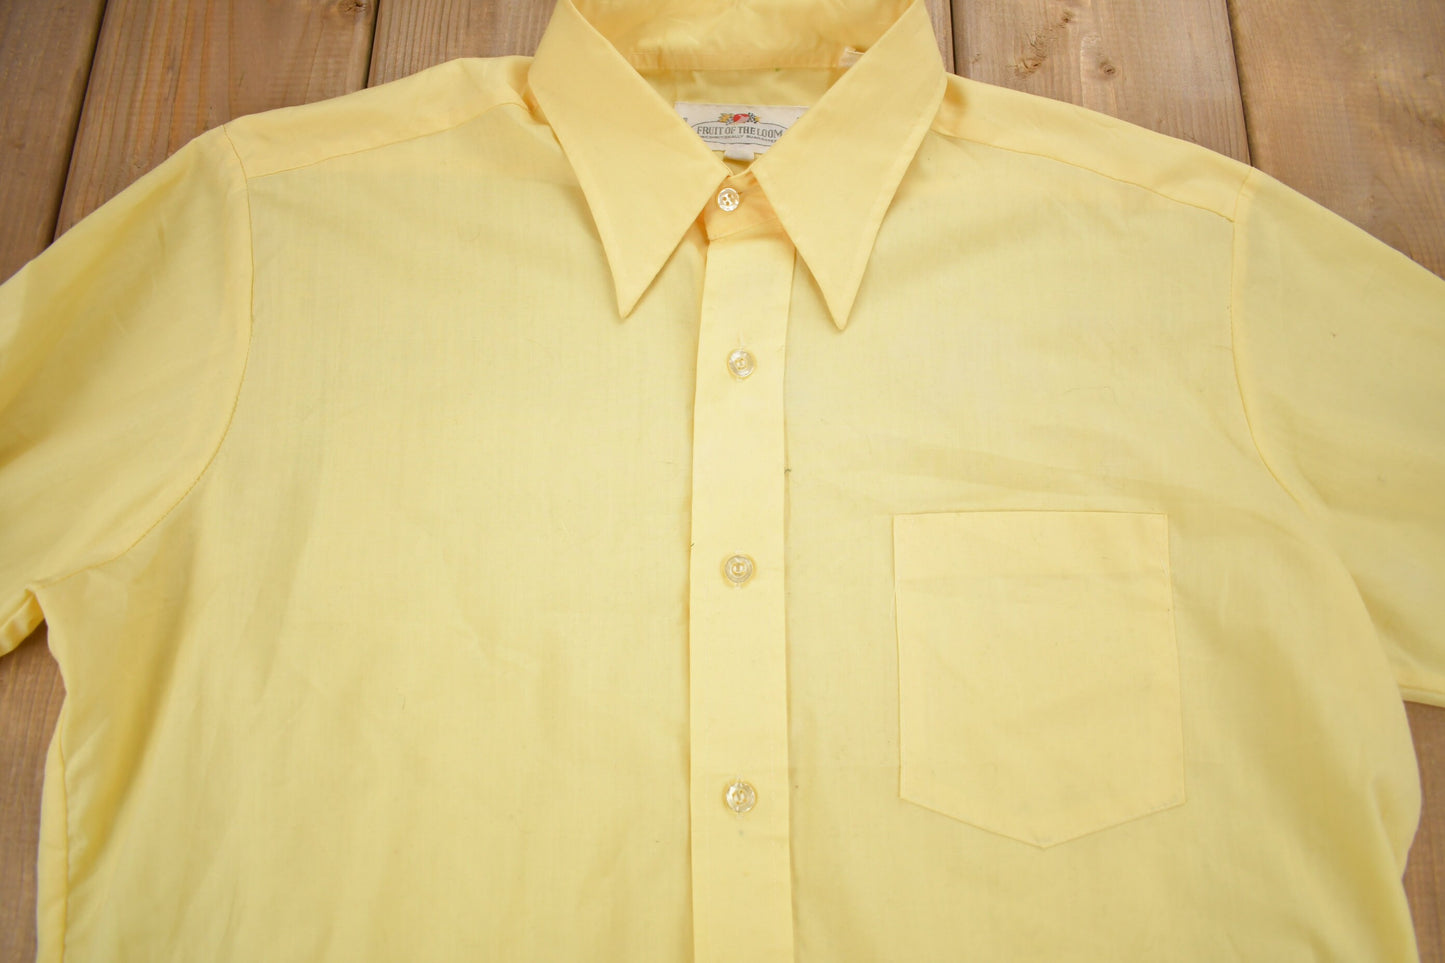 Vintage 1990s Blank Yellow Fruit Of The Loom Button Up Shirt / 1990s Button Up / Basic Button Up / Blank Button Up / Vintage Dress Shirt